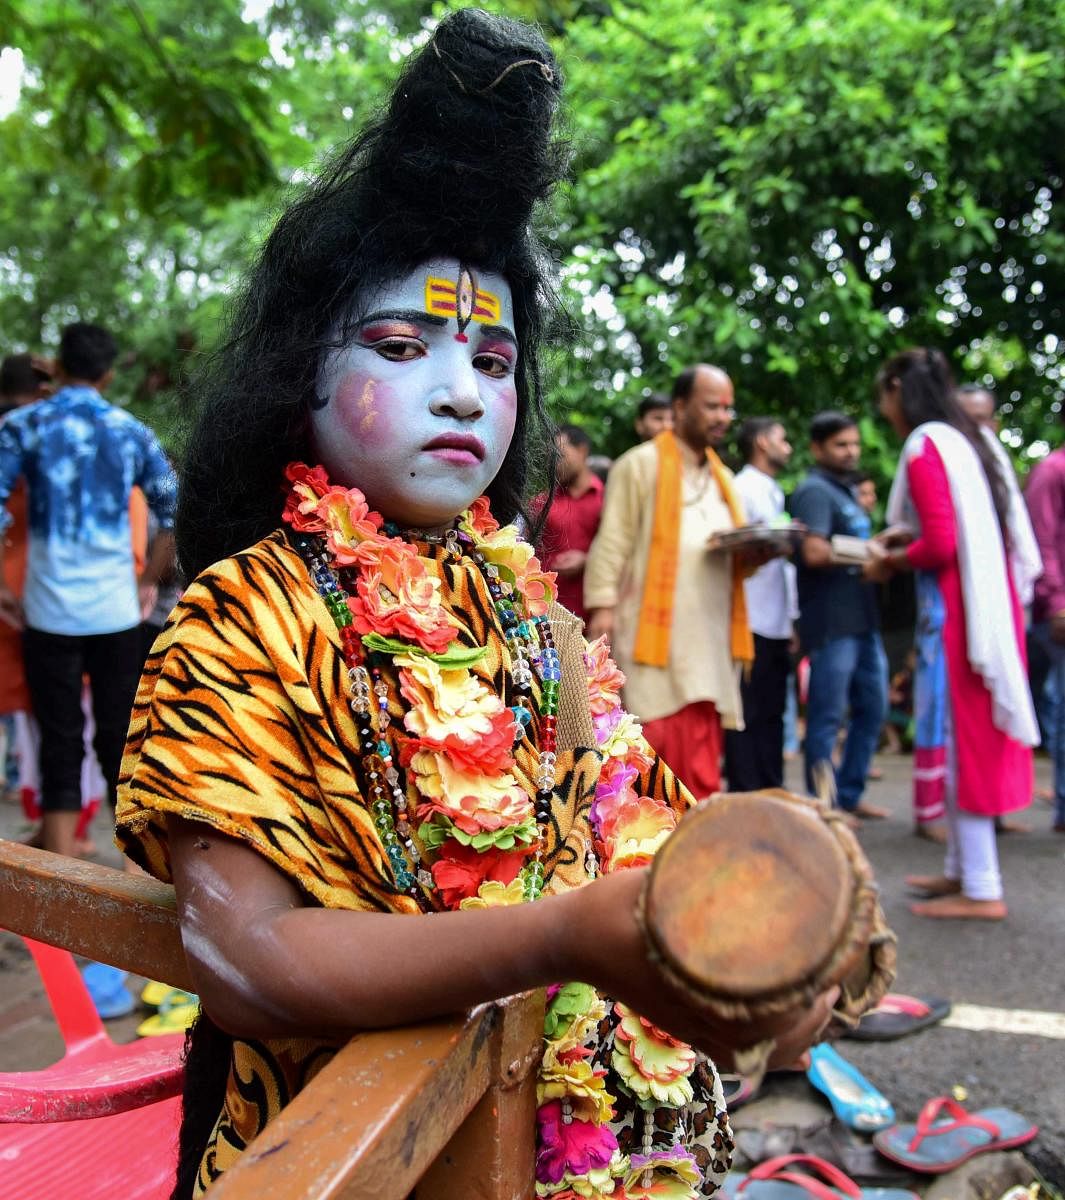 Allahabad: A child dressed as Hindu deity Shiva pose for a photographer outside a temple on the first Monday of the holy month of 'Shravan' at, in Allahabad on July 30, 2018. (PTI Photo)